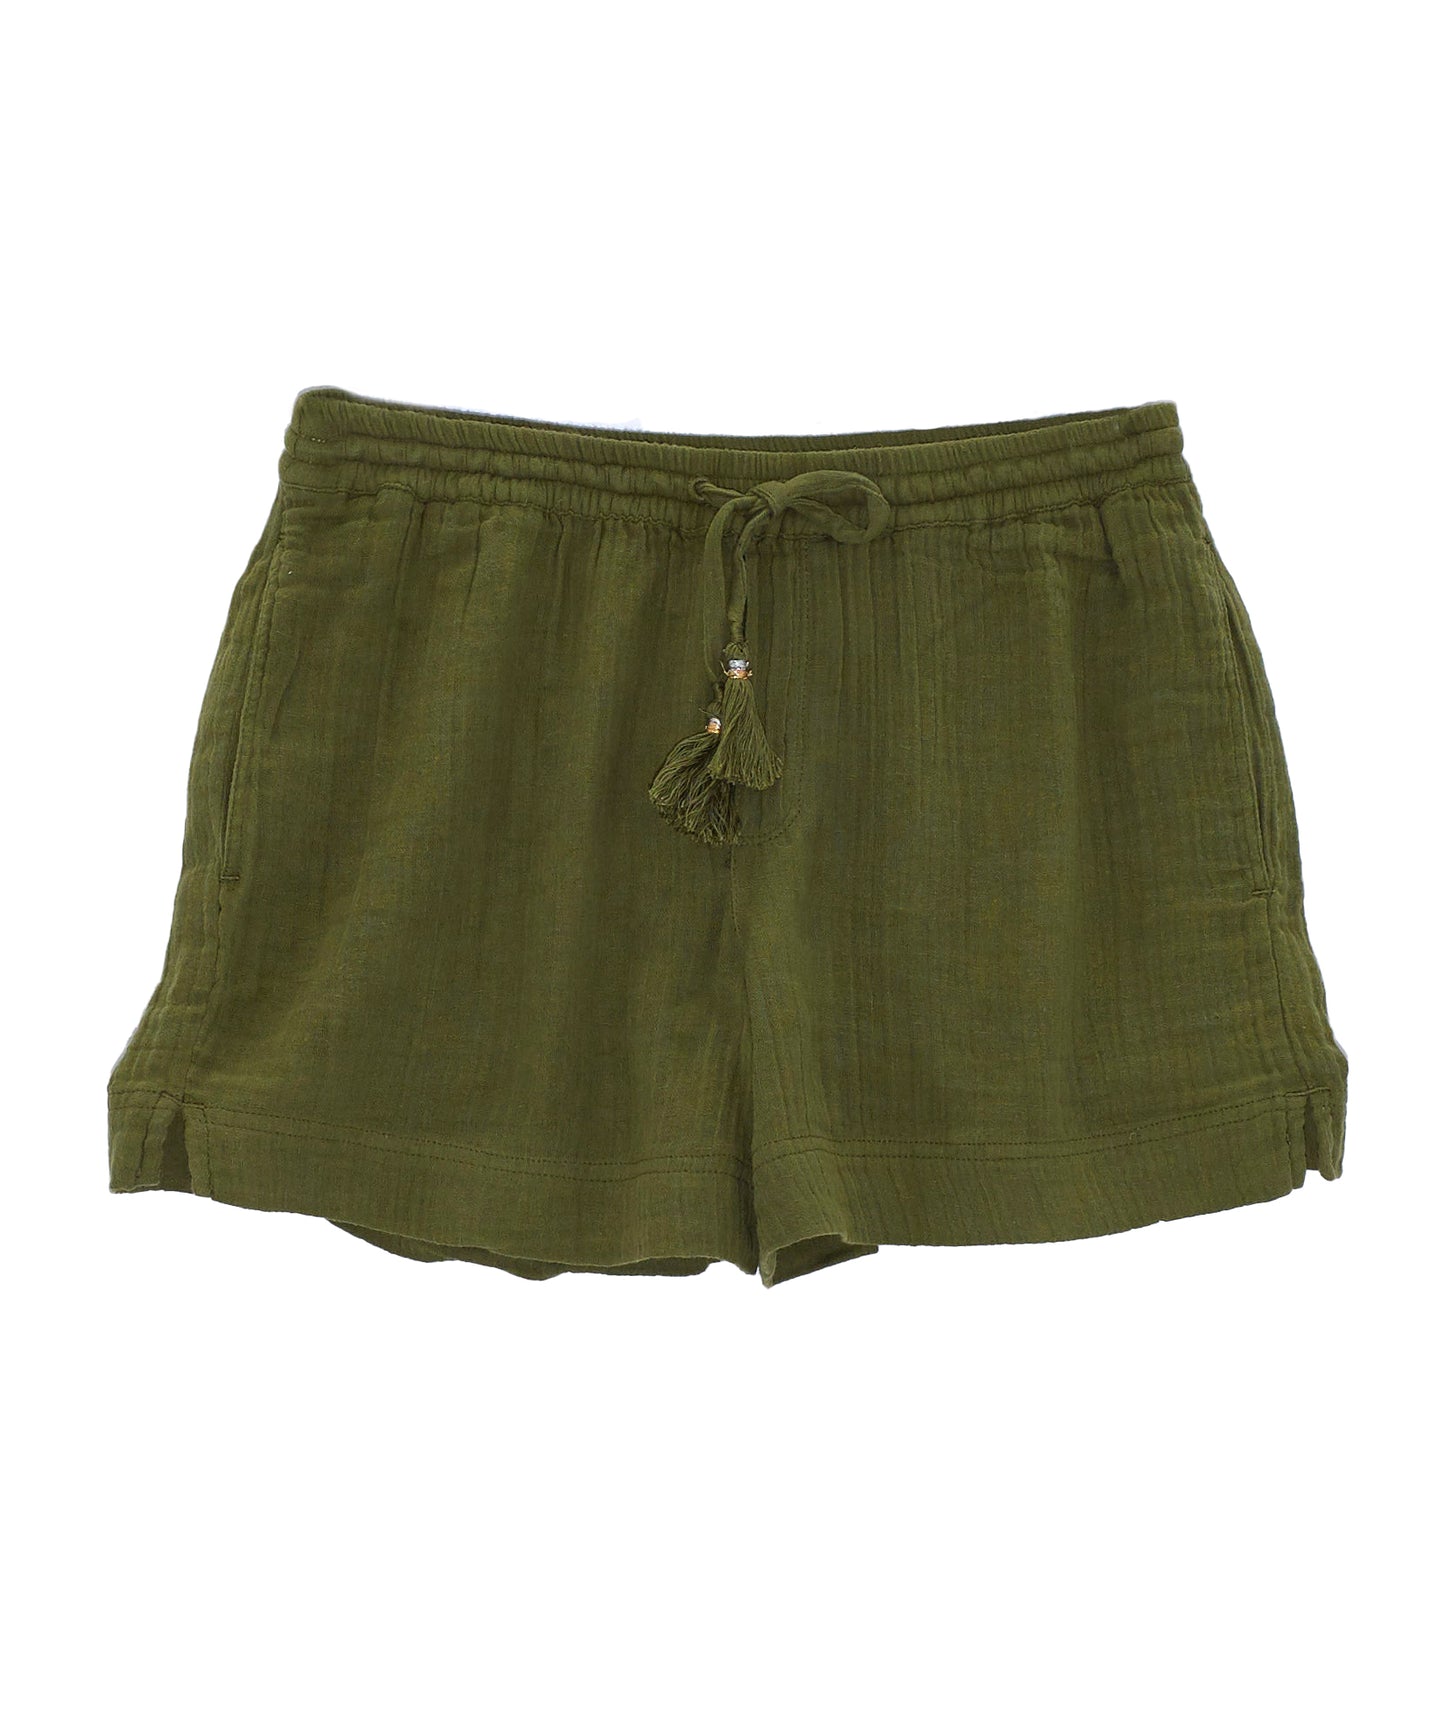 Double Gauze Beach Shorts in color Olive